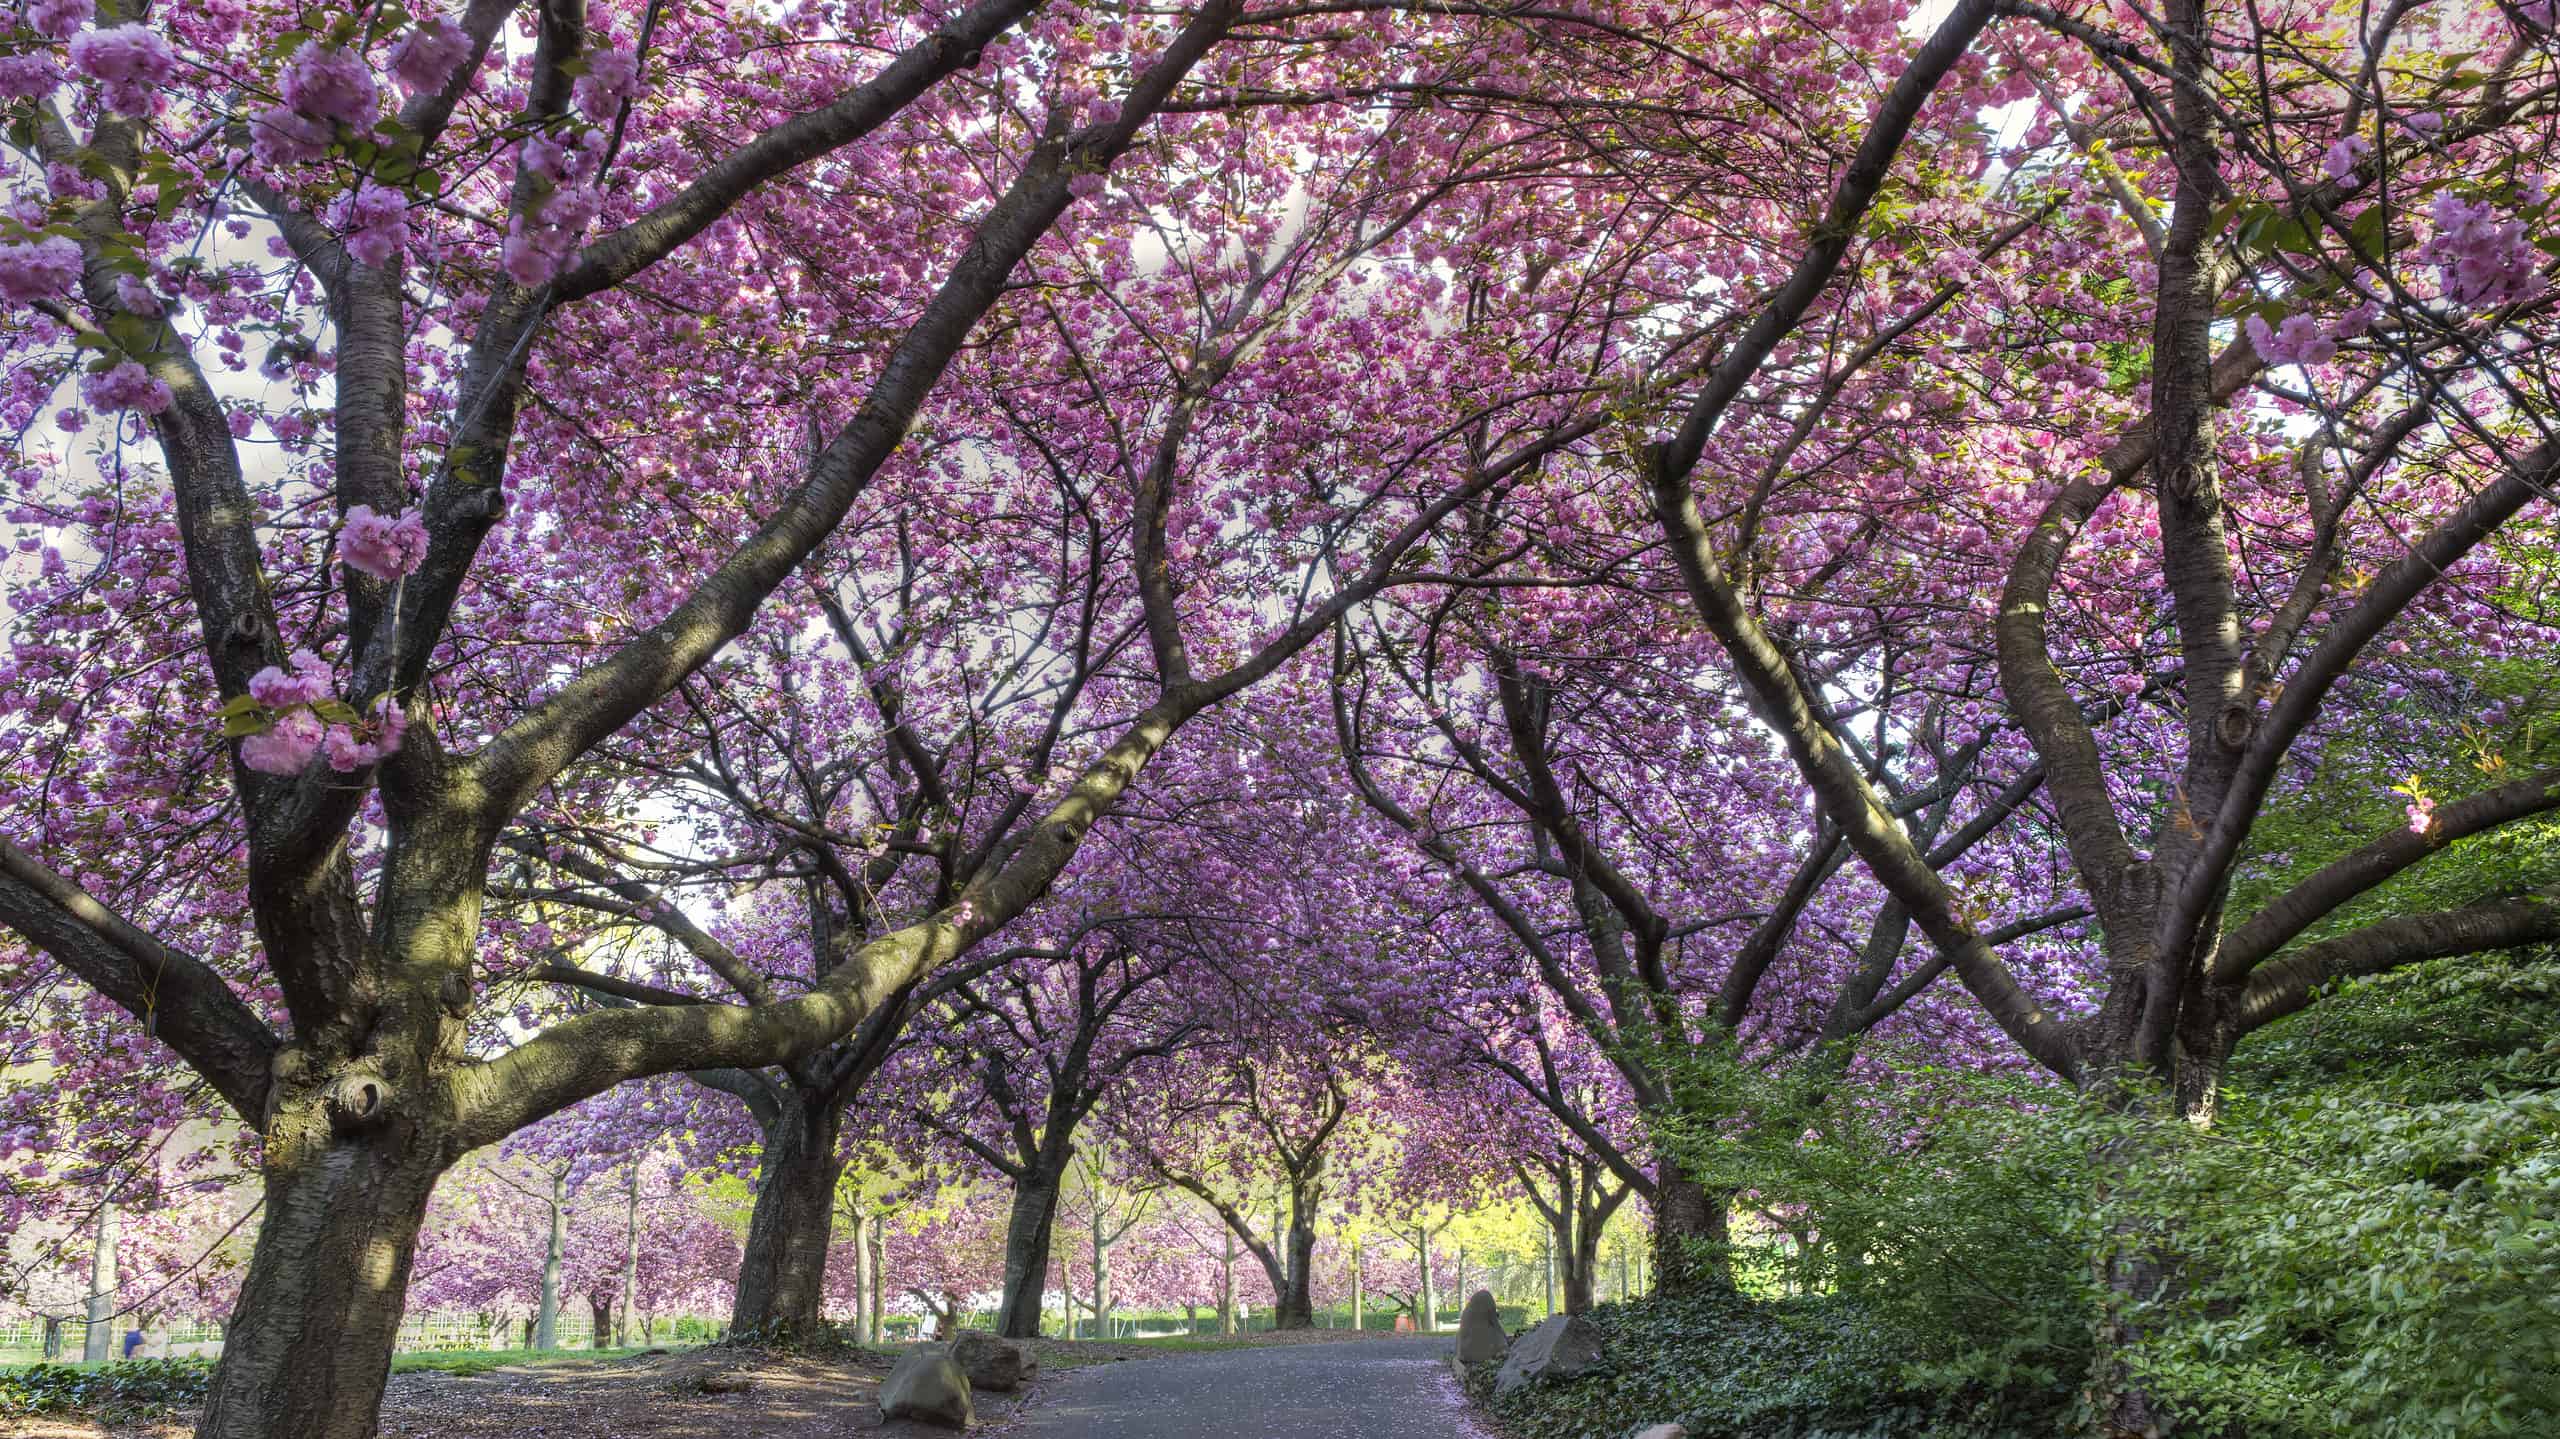 The cherry blossoms in New York City create an amazing springtime display!